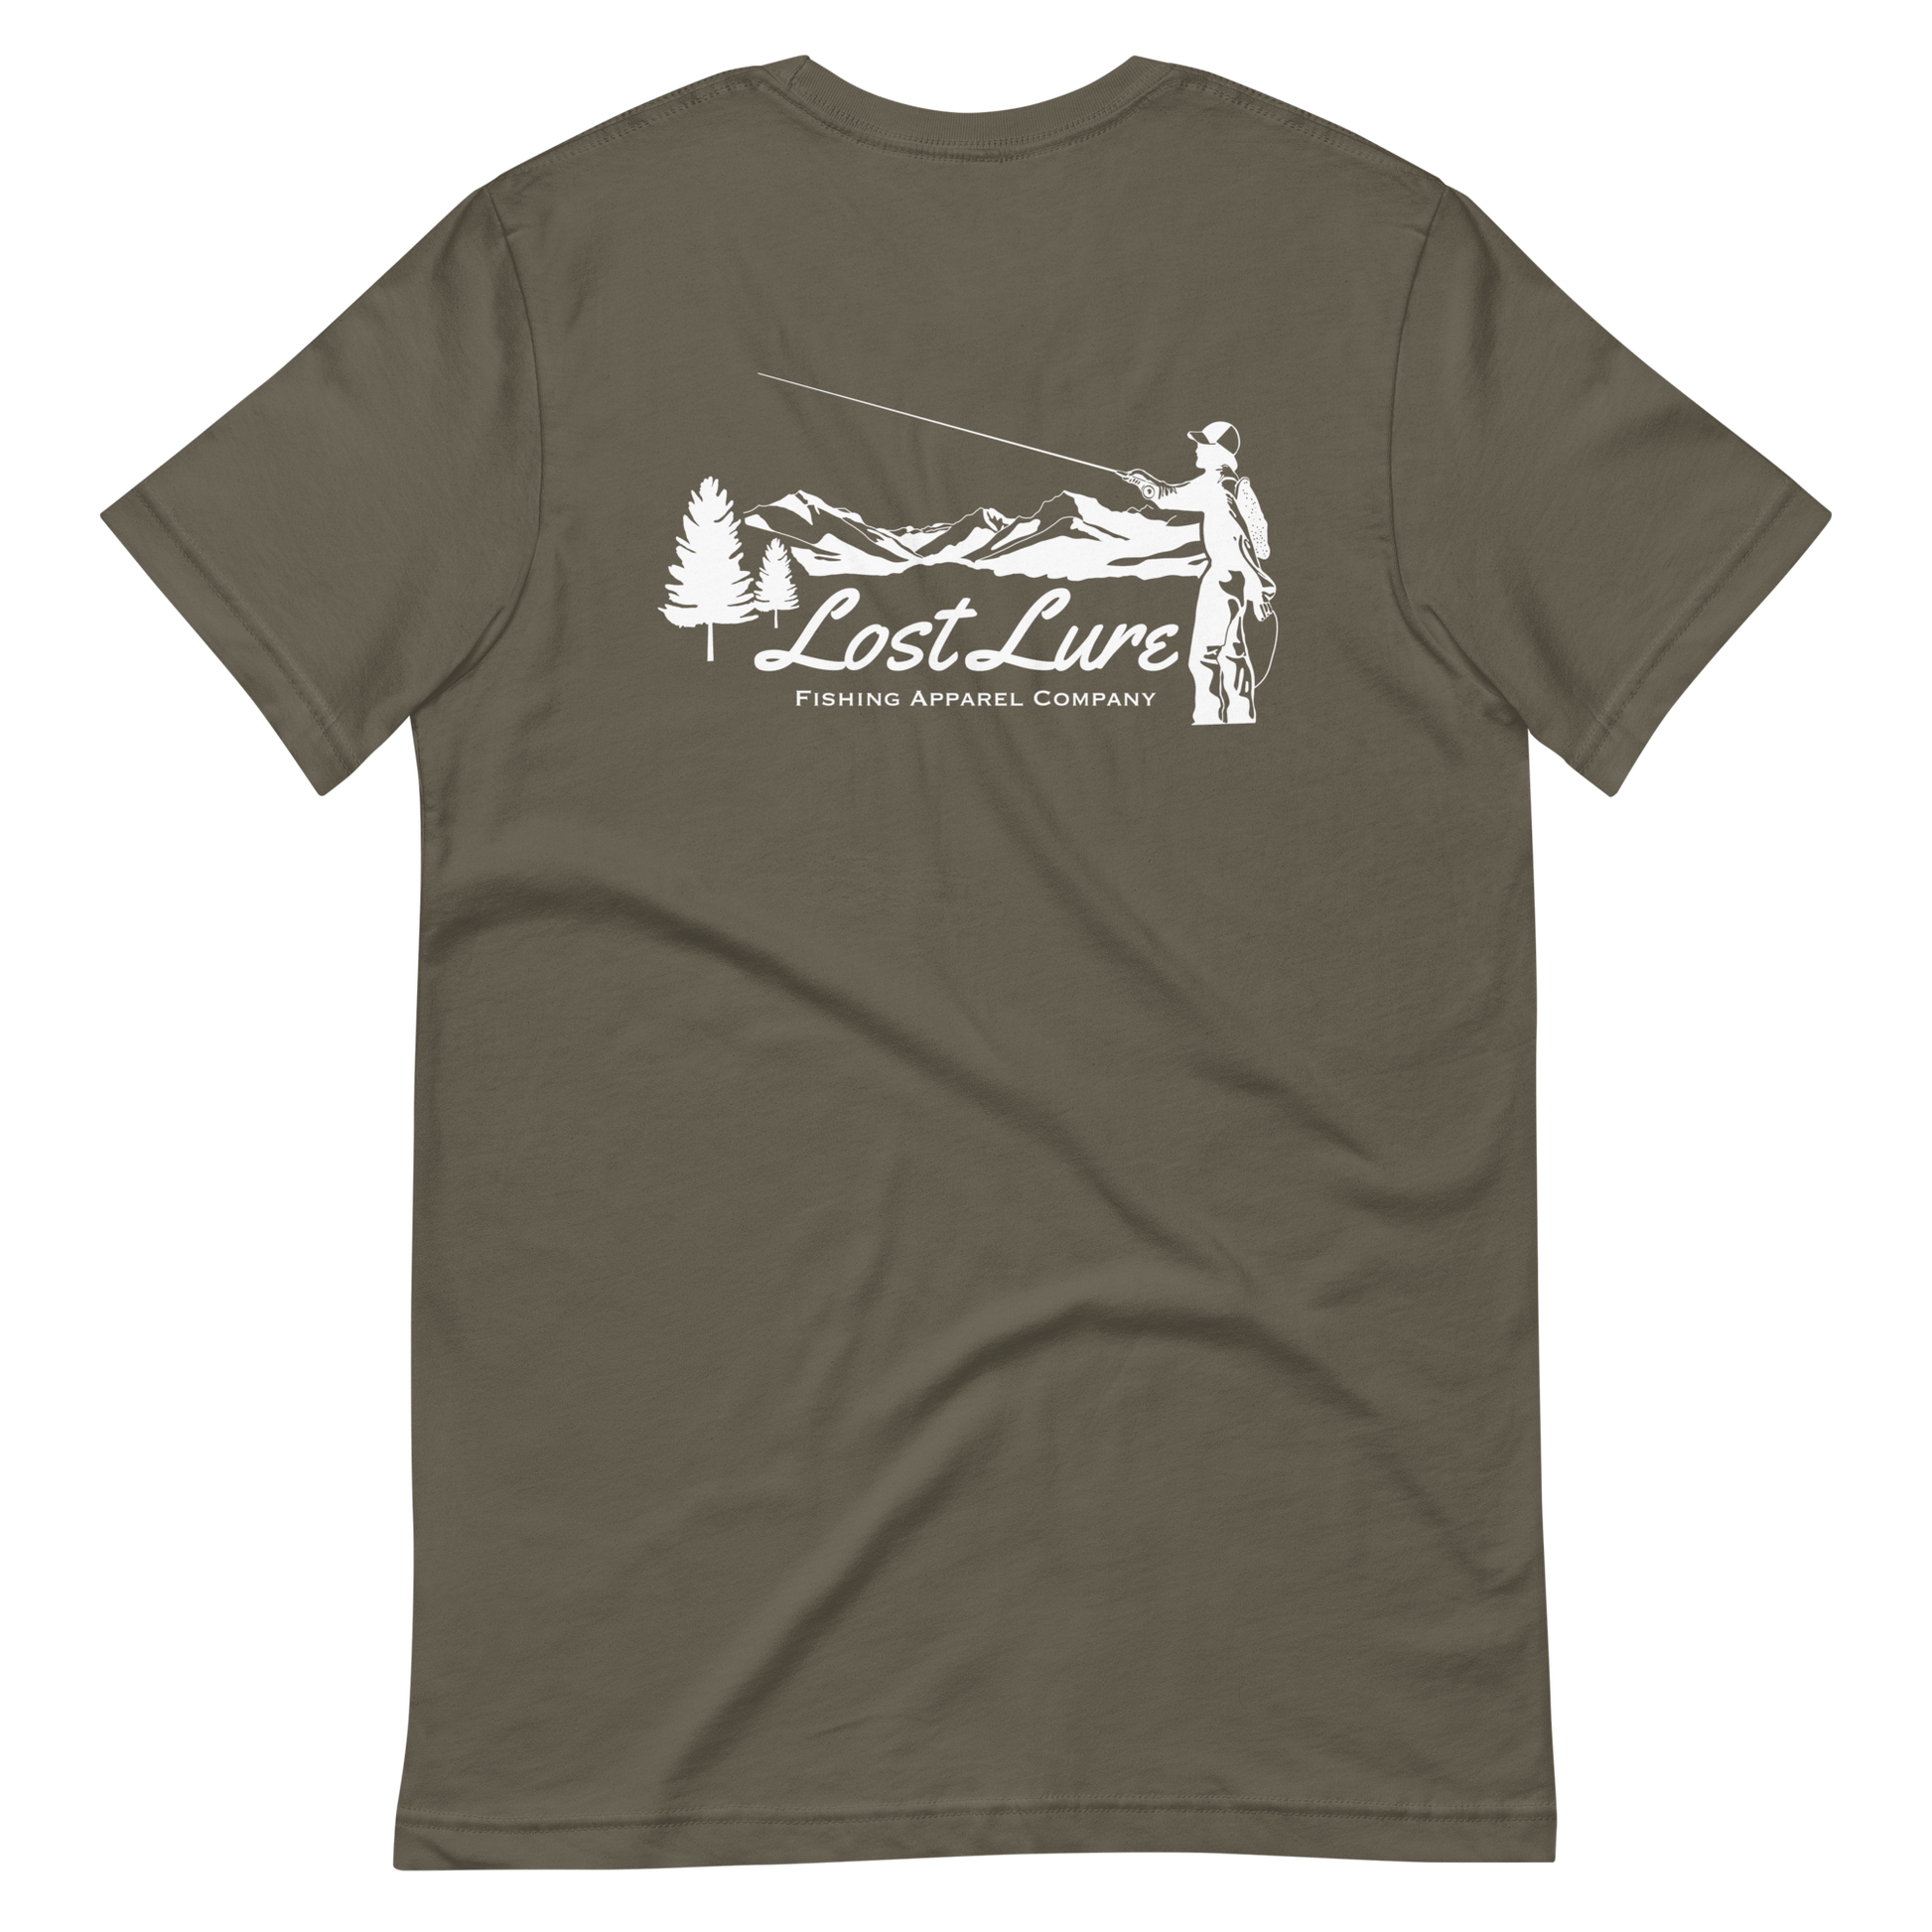 Fly fishing Lost lure shirt. It has a design on the back of the shirt black and white outline a fly fisherman and the Rocky Mountains. Green fishing shirt, back side 